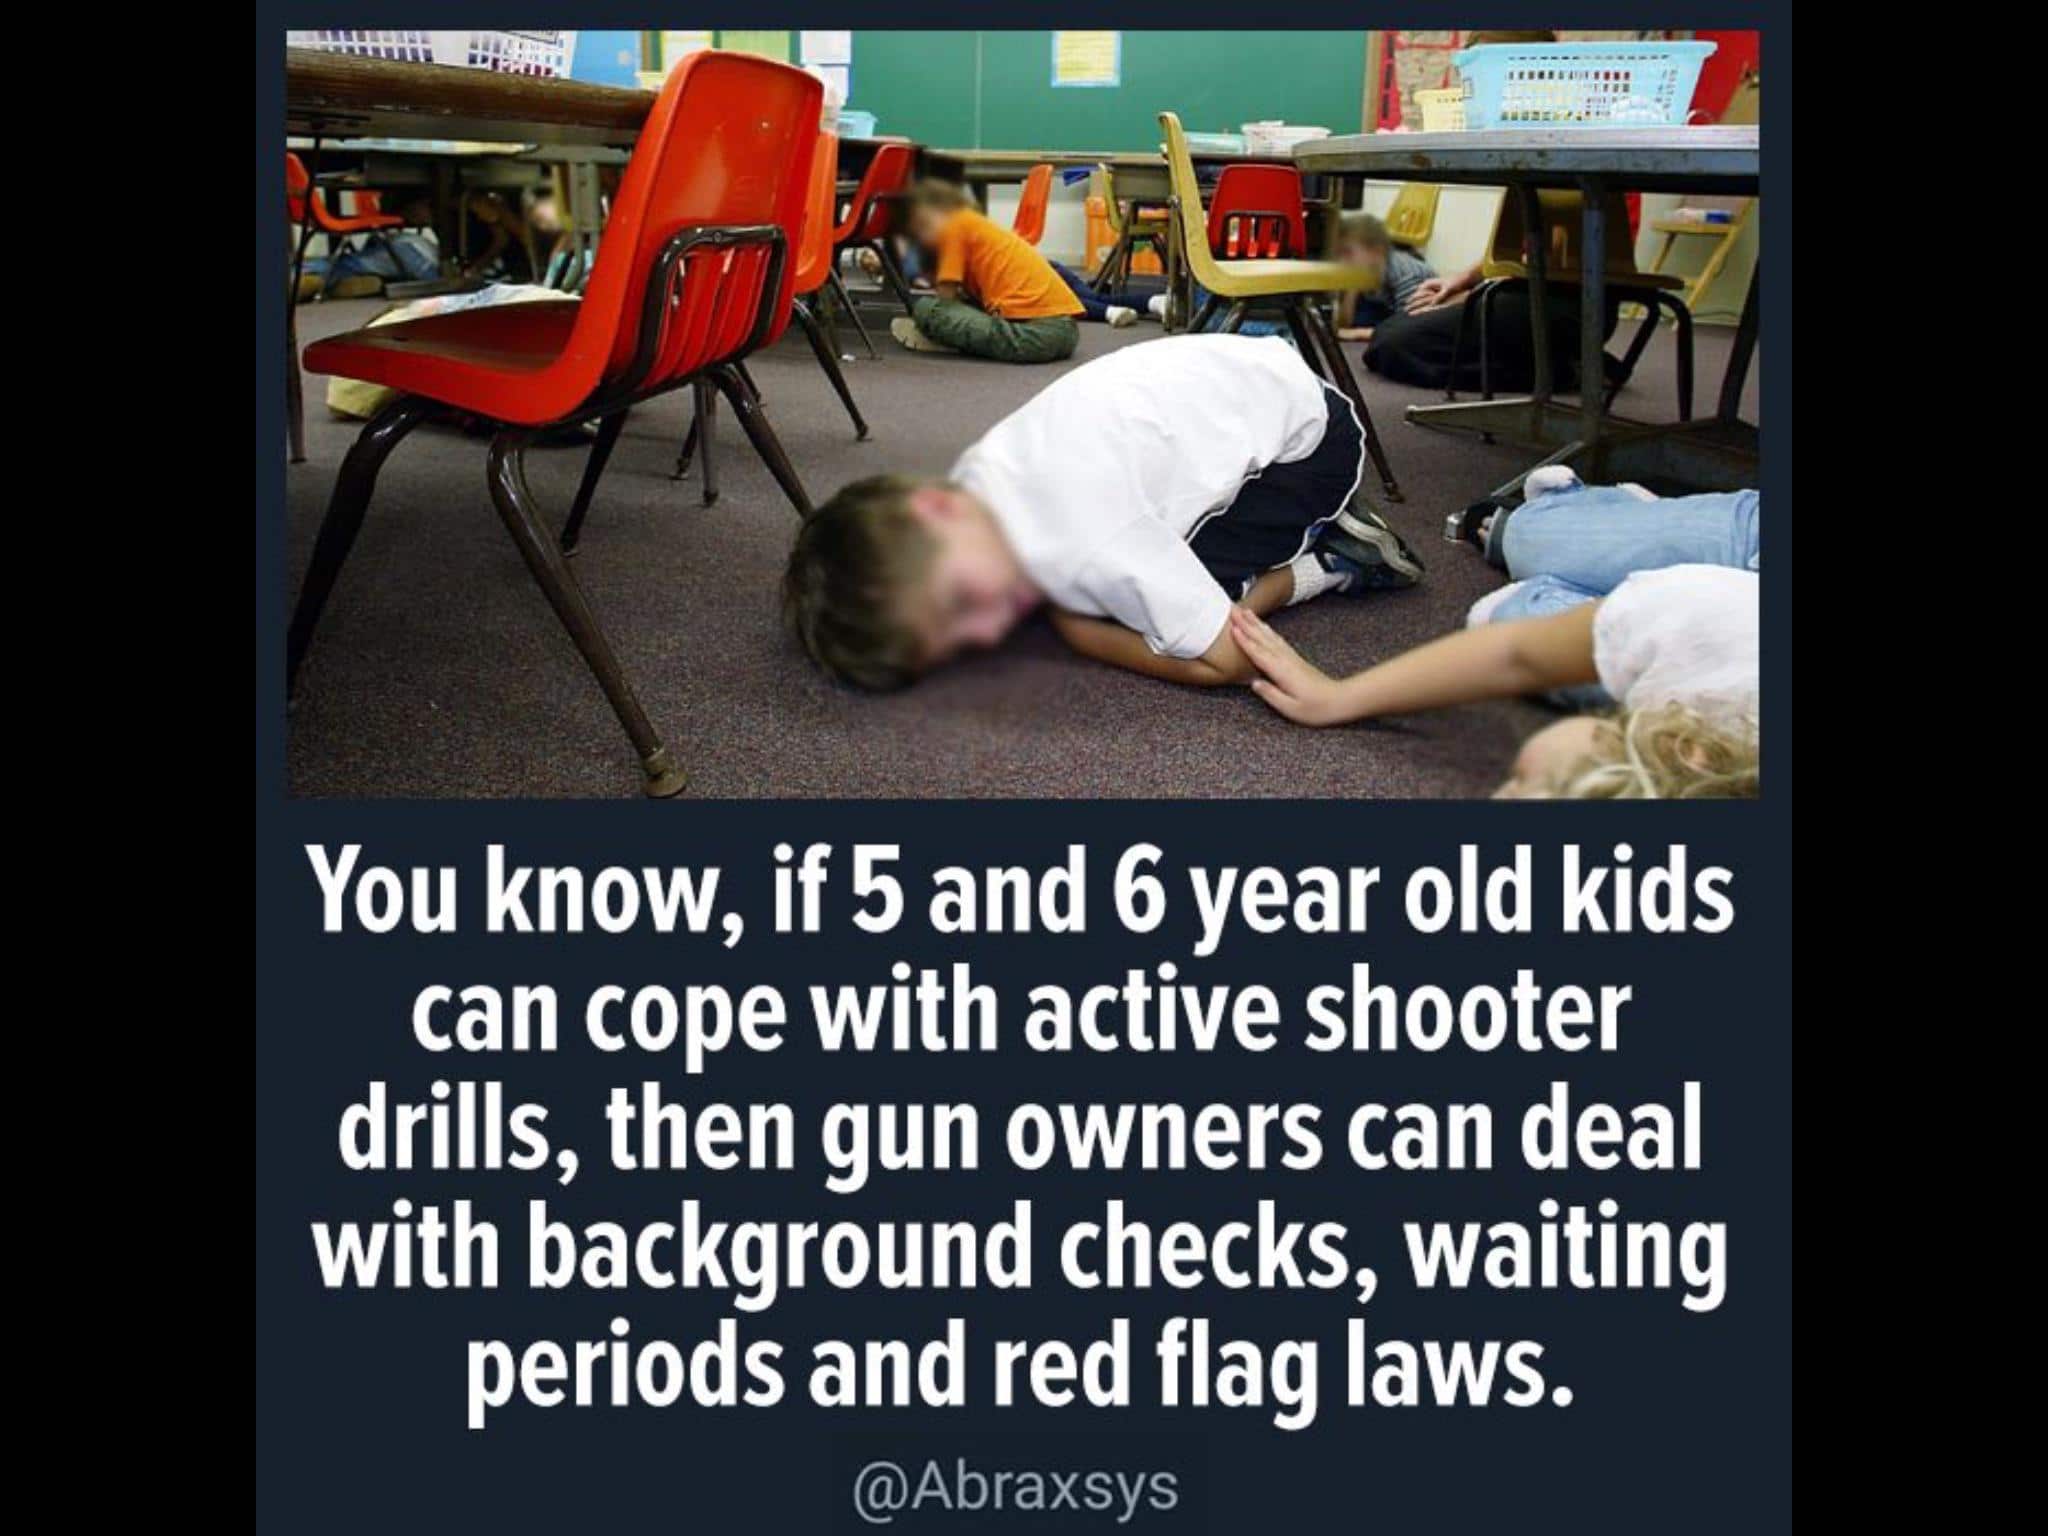 political political-memes political text: You know, if 5 and 6 year old kids can cope with active shooter drills, then gun owners can deal with background checks, waiting periods and red flag laws. @Abraxsys 